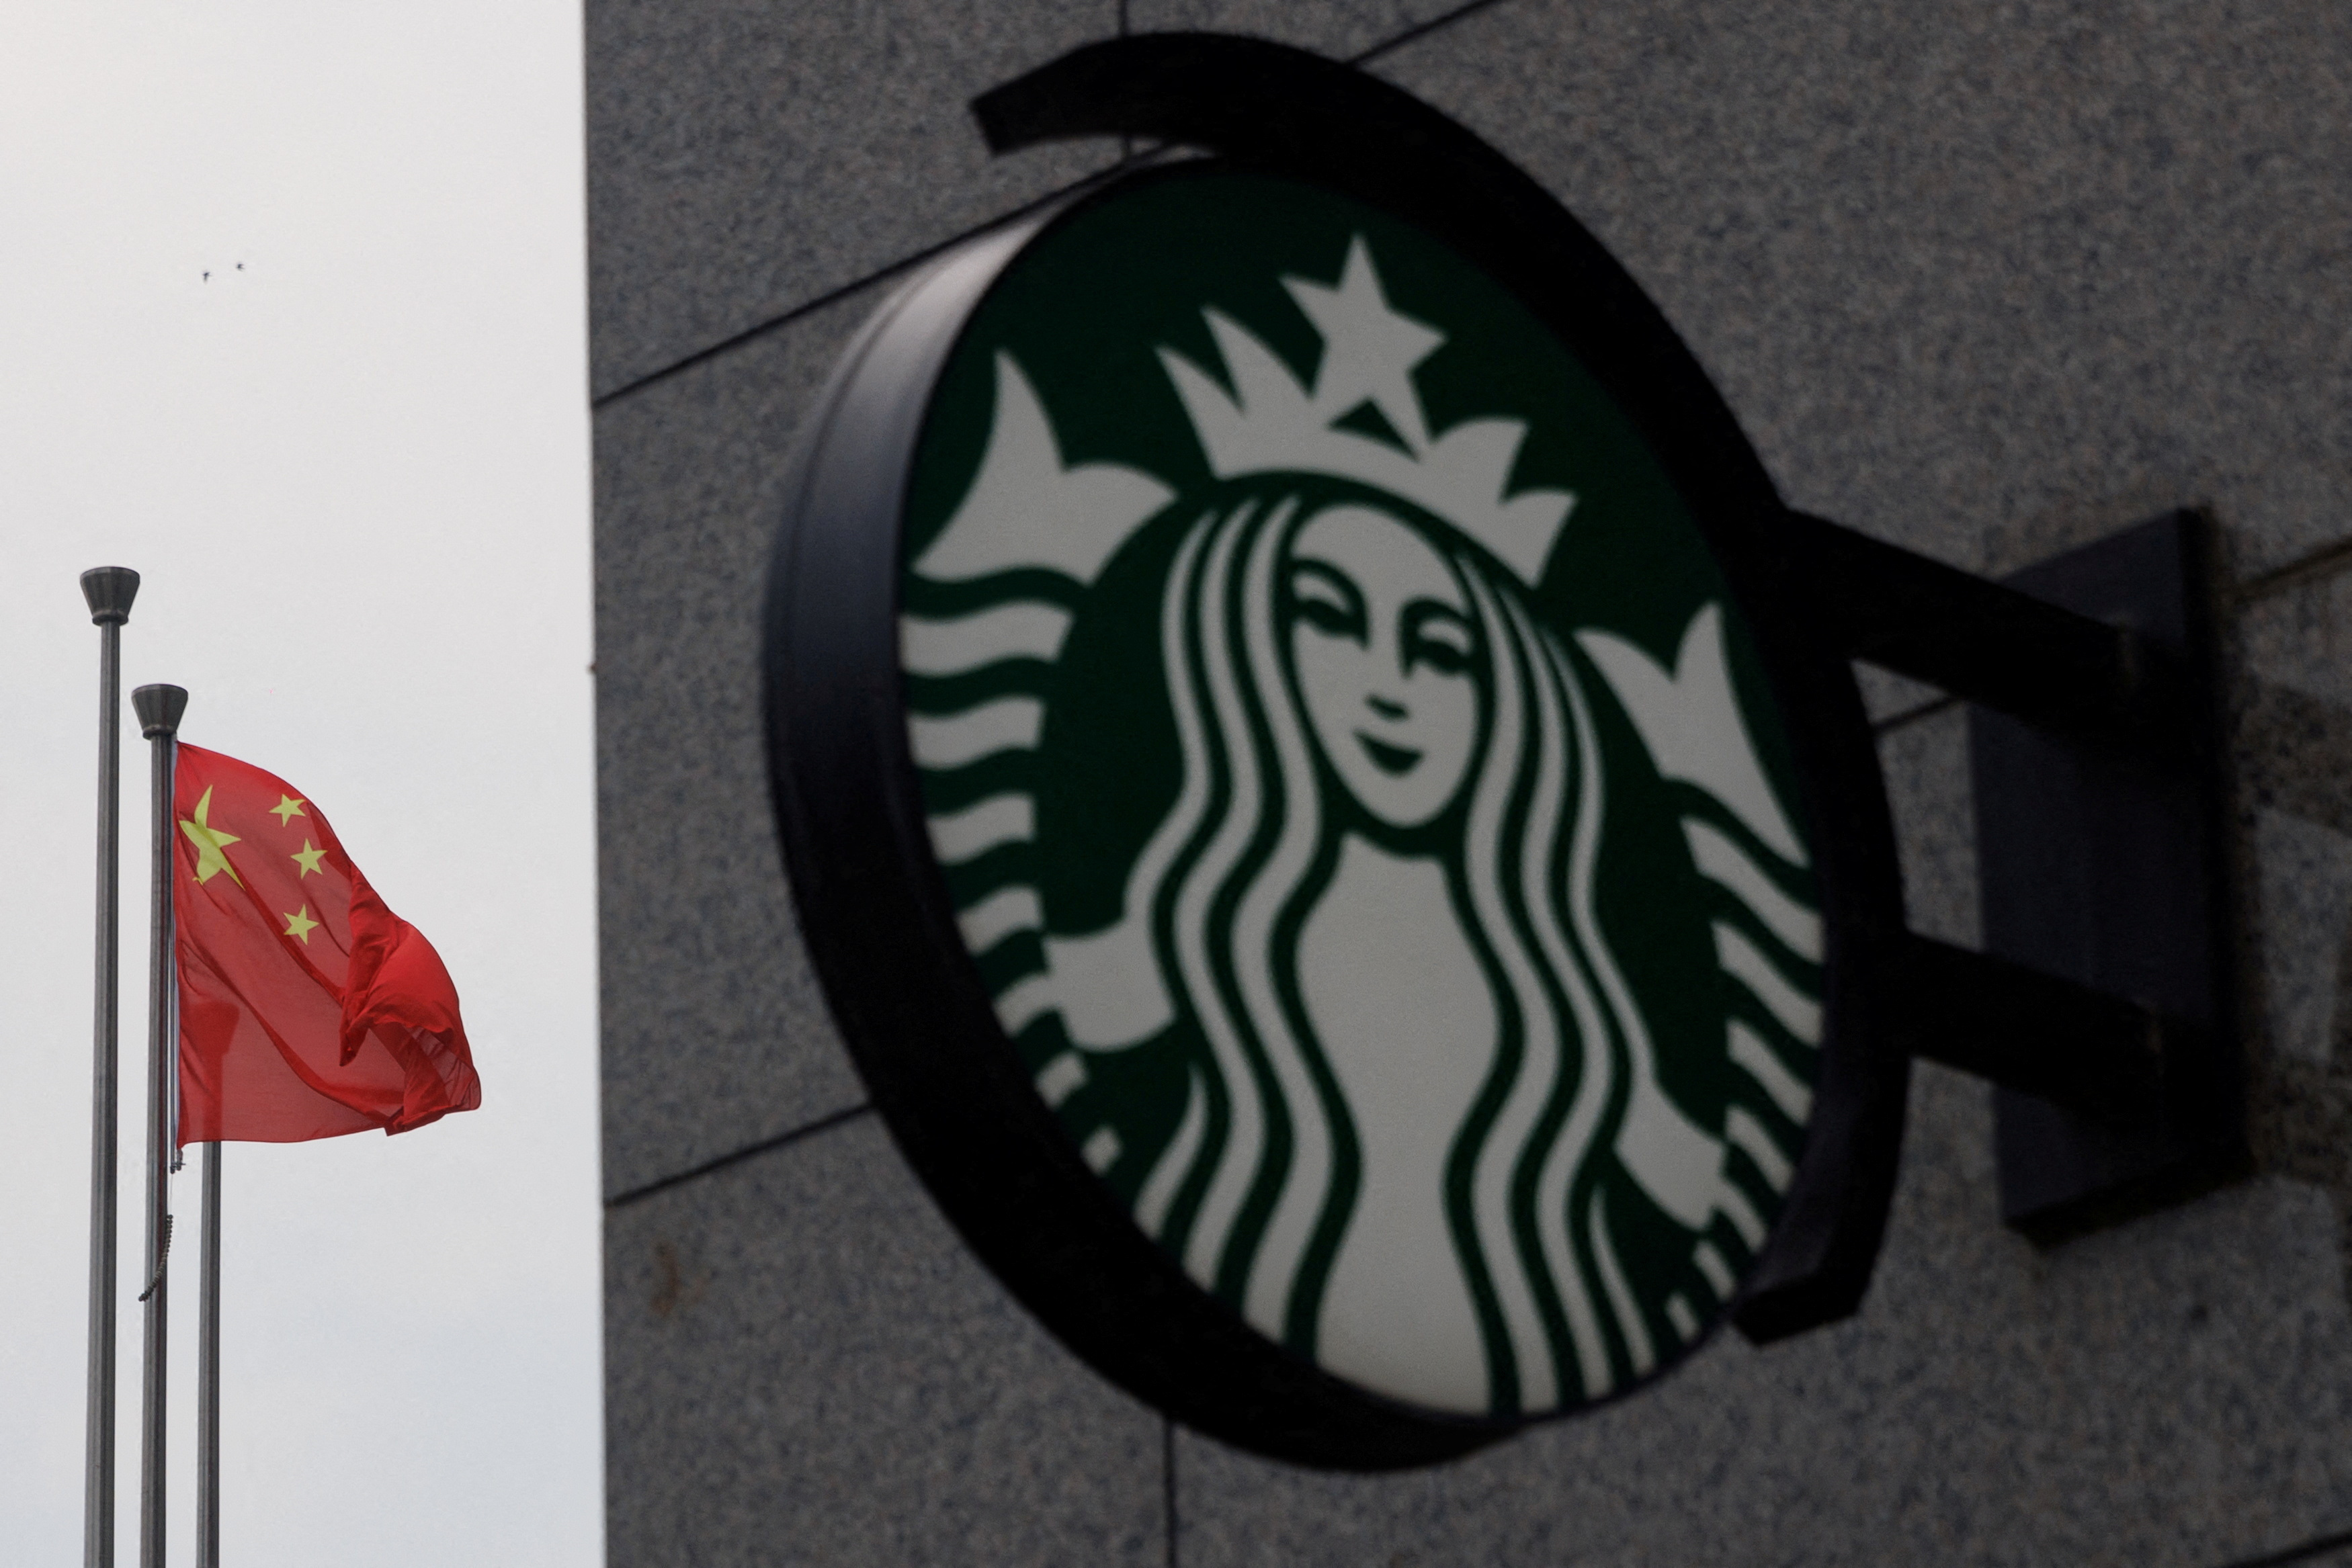 The Chinese flag flies near the Starbucks logo outside a cafe of the coffee chain in Beijing